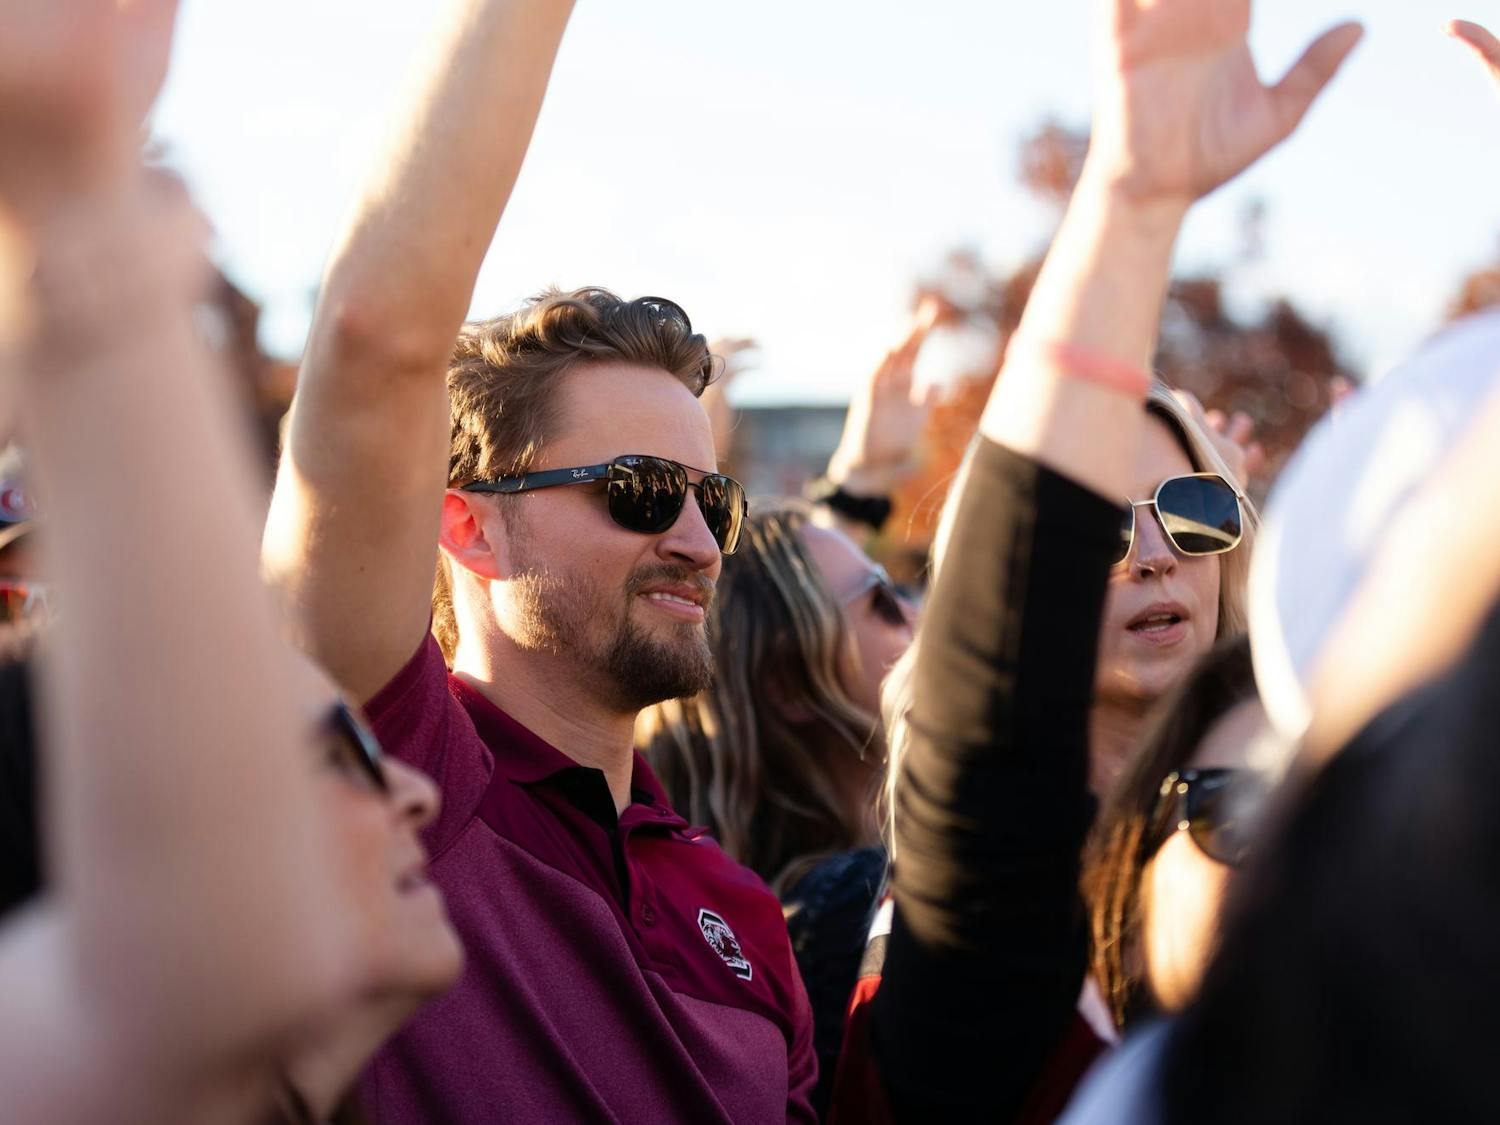 A fan moves his hands to the music while at the pre-game Darude concert in Gamecock Park. The Gamecocks went on to defeat the Wildcats 17-14.